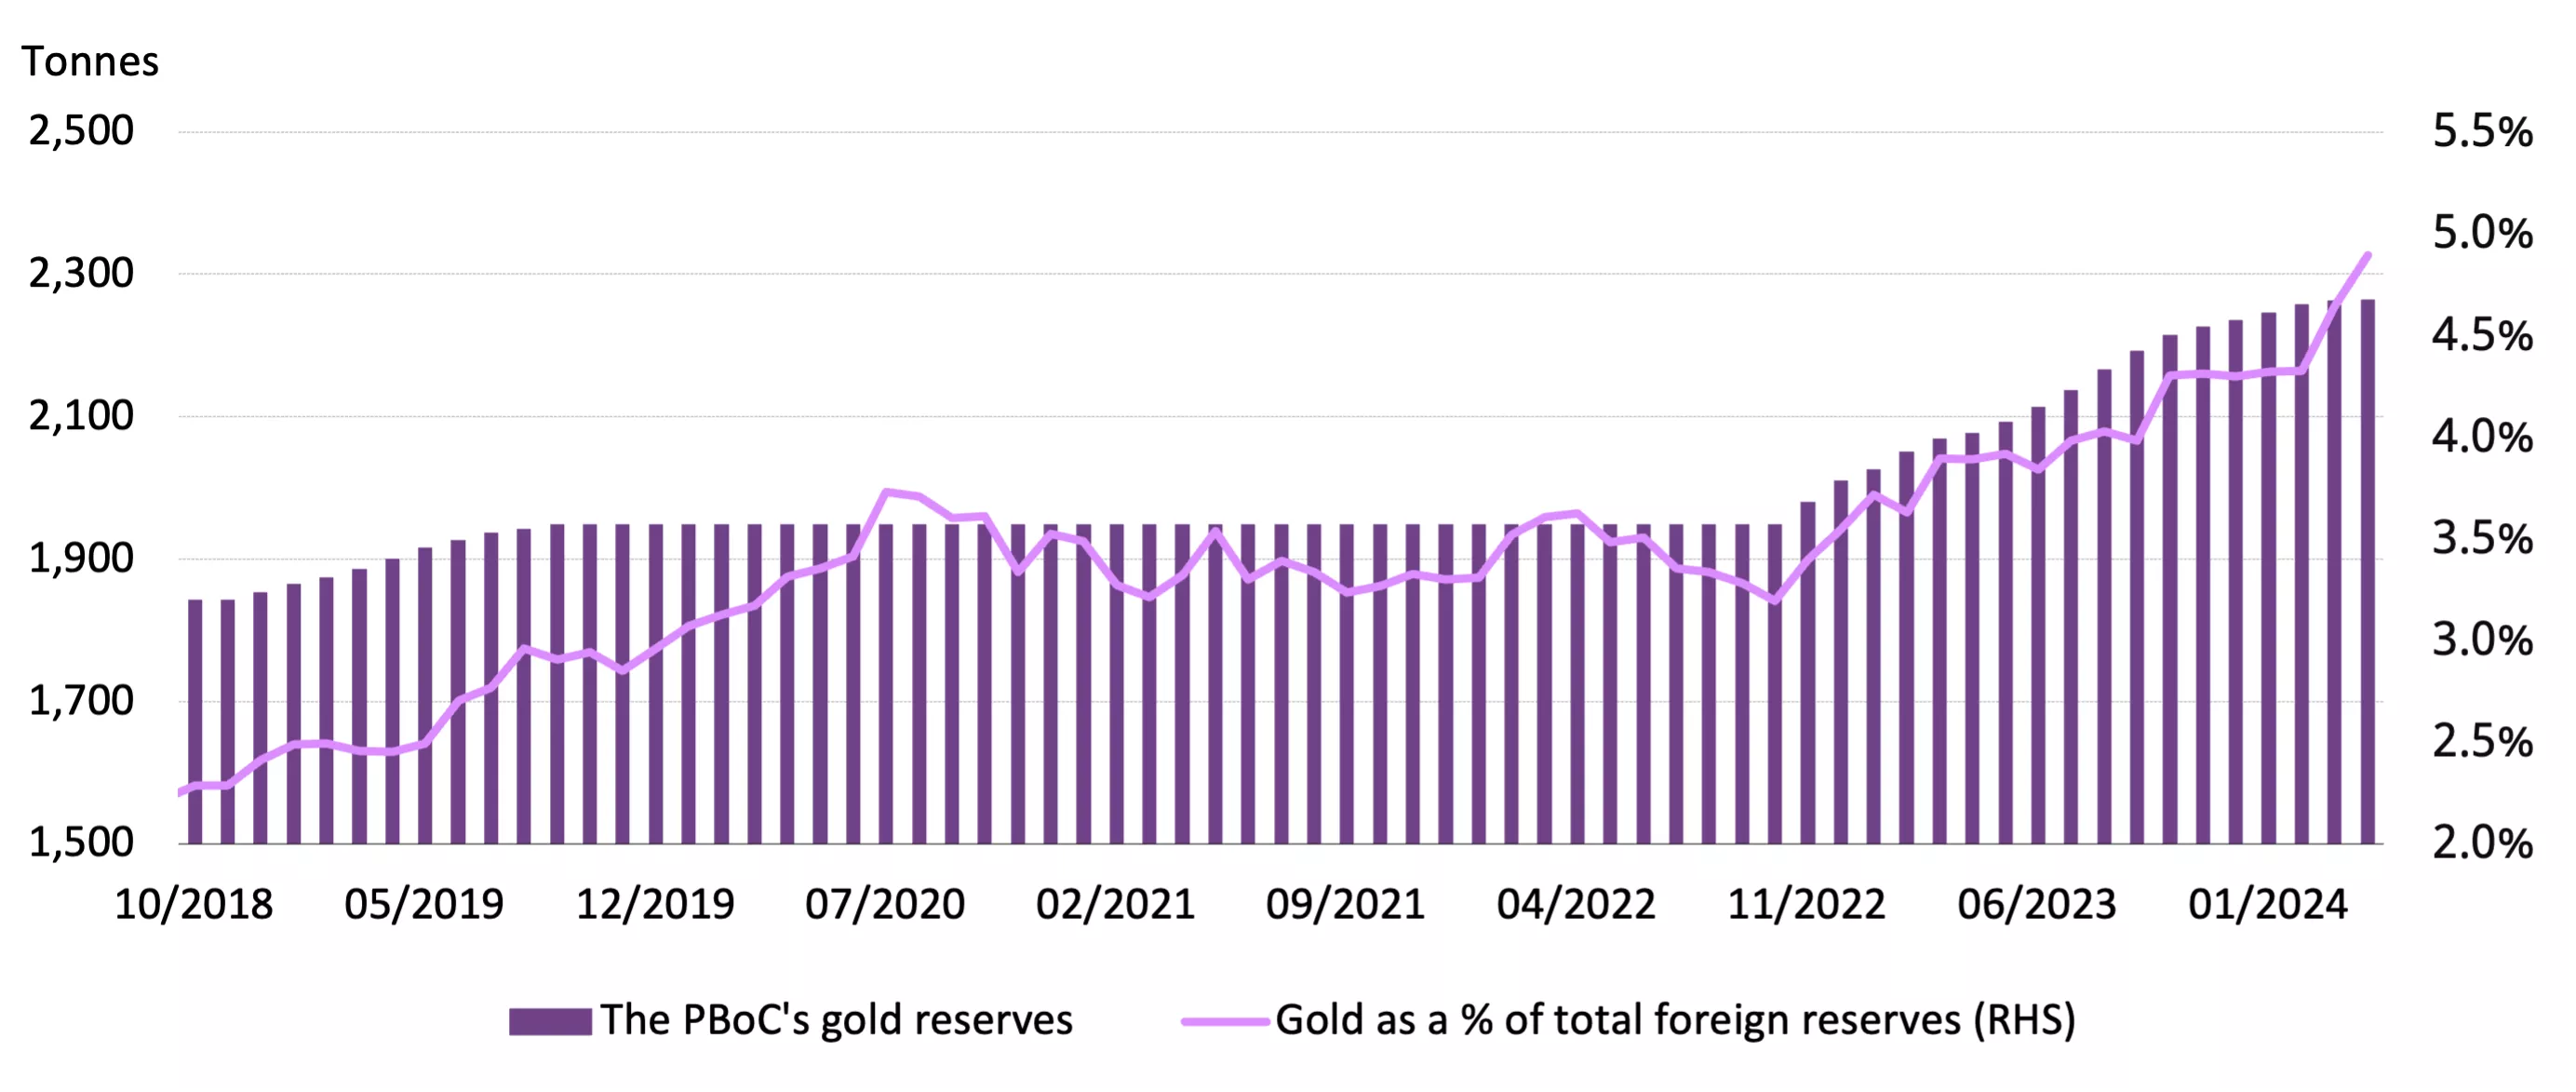 Official gold reserves (tonnage) and their share of total foreign exchange reserves*